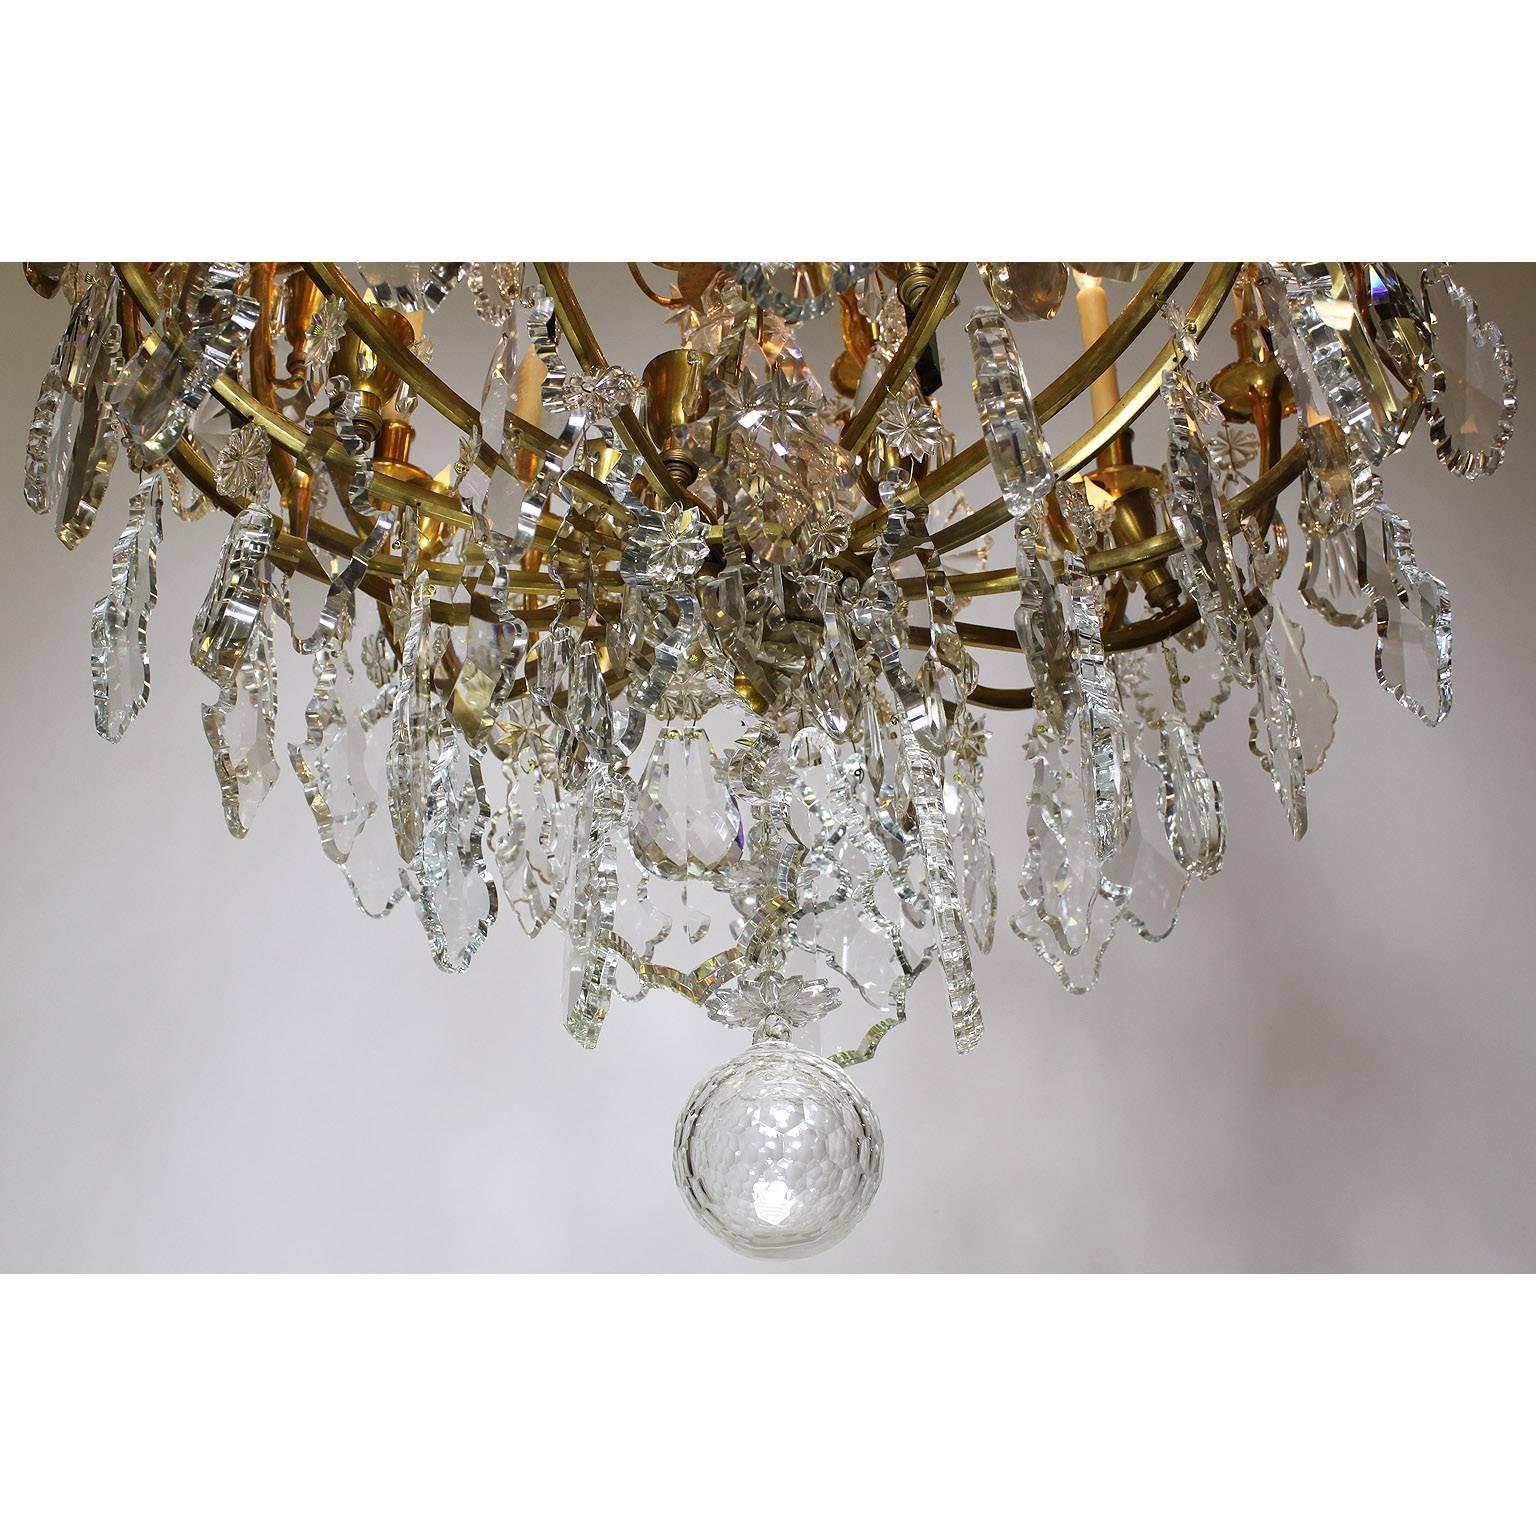 French 19th Century Louis XV Style Gilt-Bronze and Crystal Chandelier For Sale 7